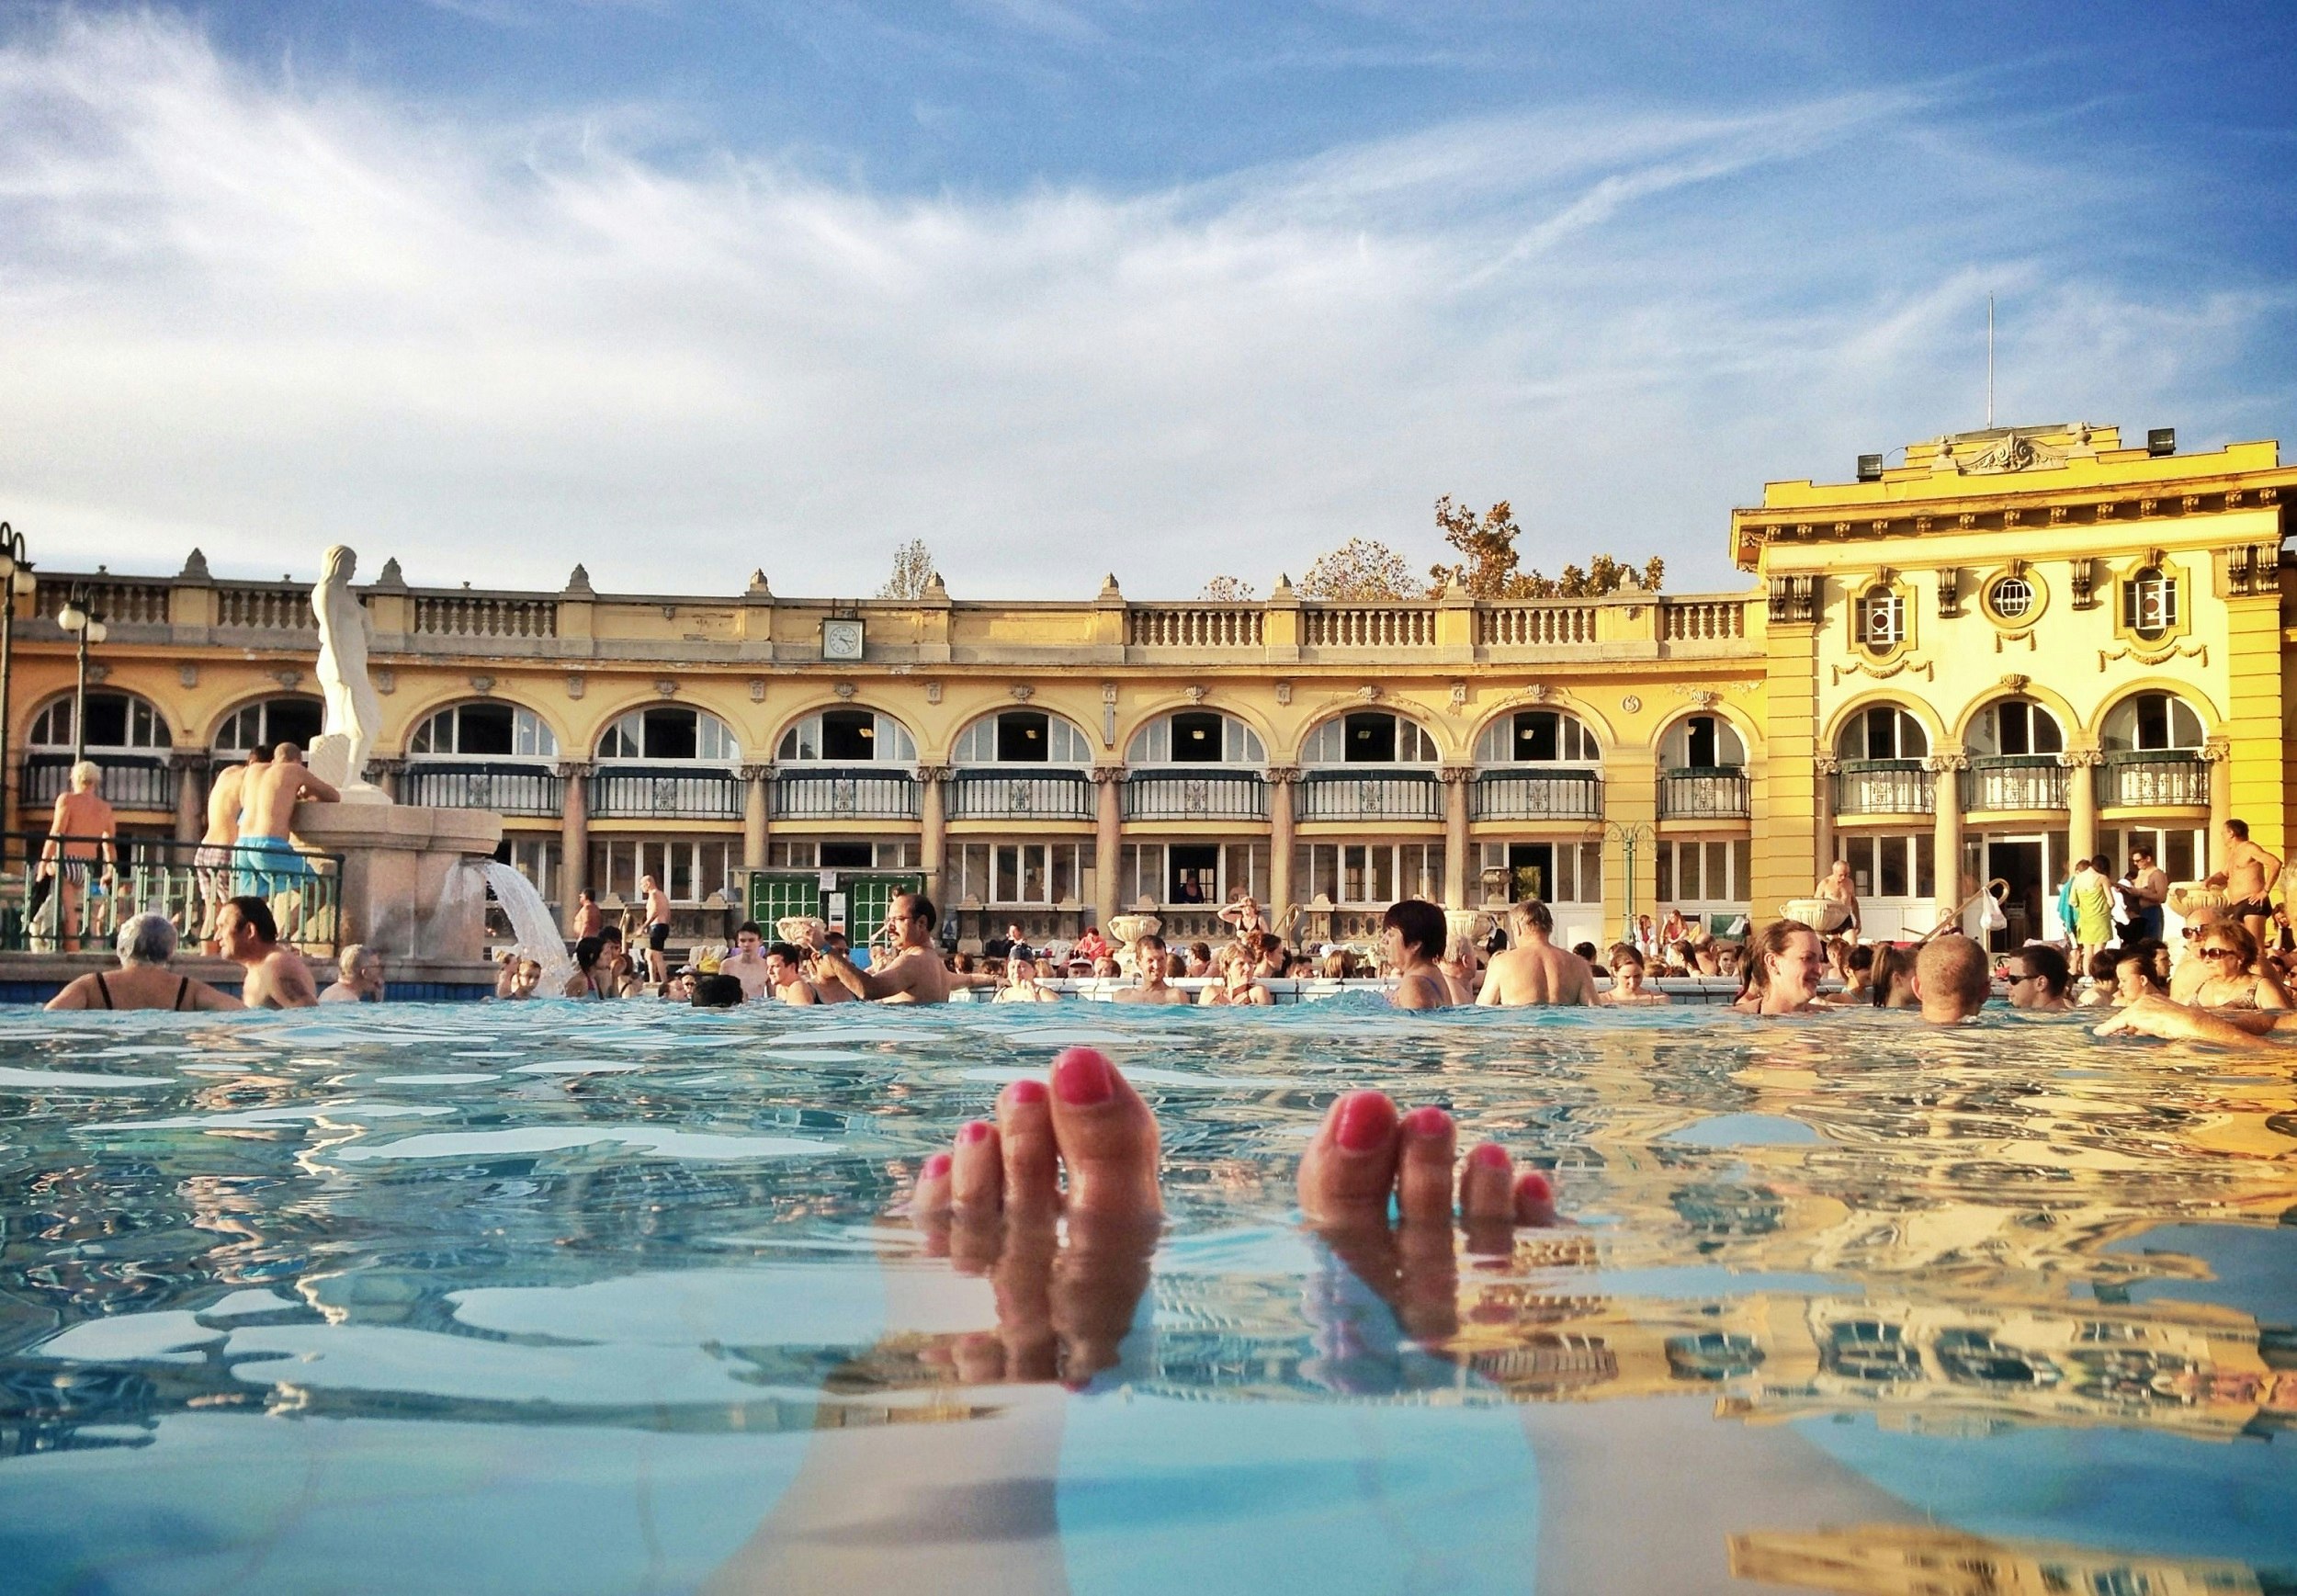 A point-of-view shot from someone in the outdoor pool at a thermal bath. Their feet are poking out of the water. Many other people relax in the pool. A curved yellow building with arched windows and balconies surrounds the thermal bath.